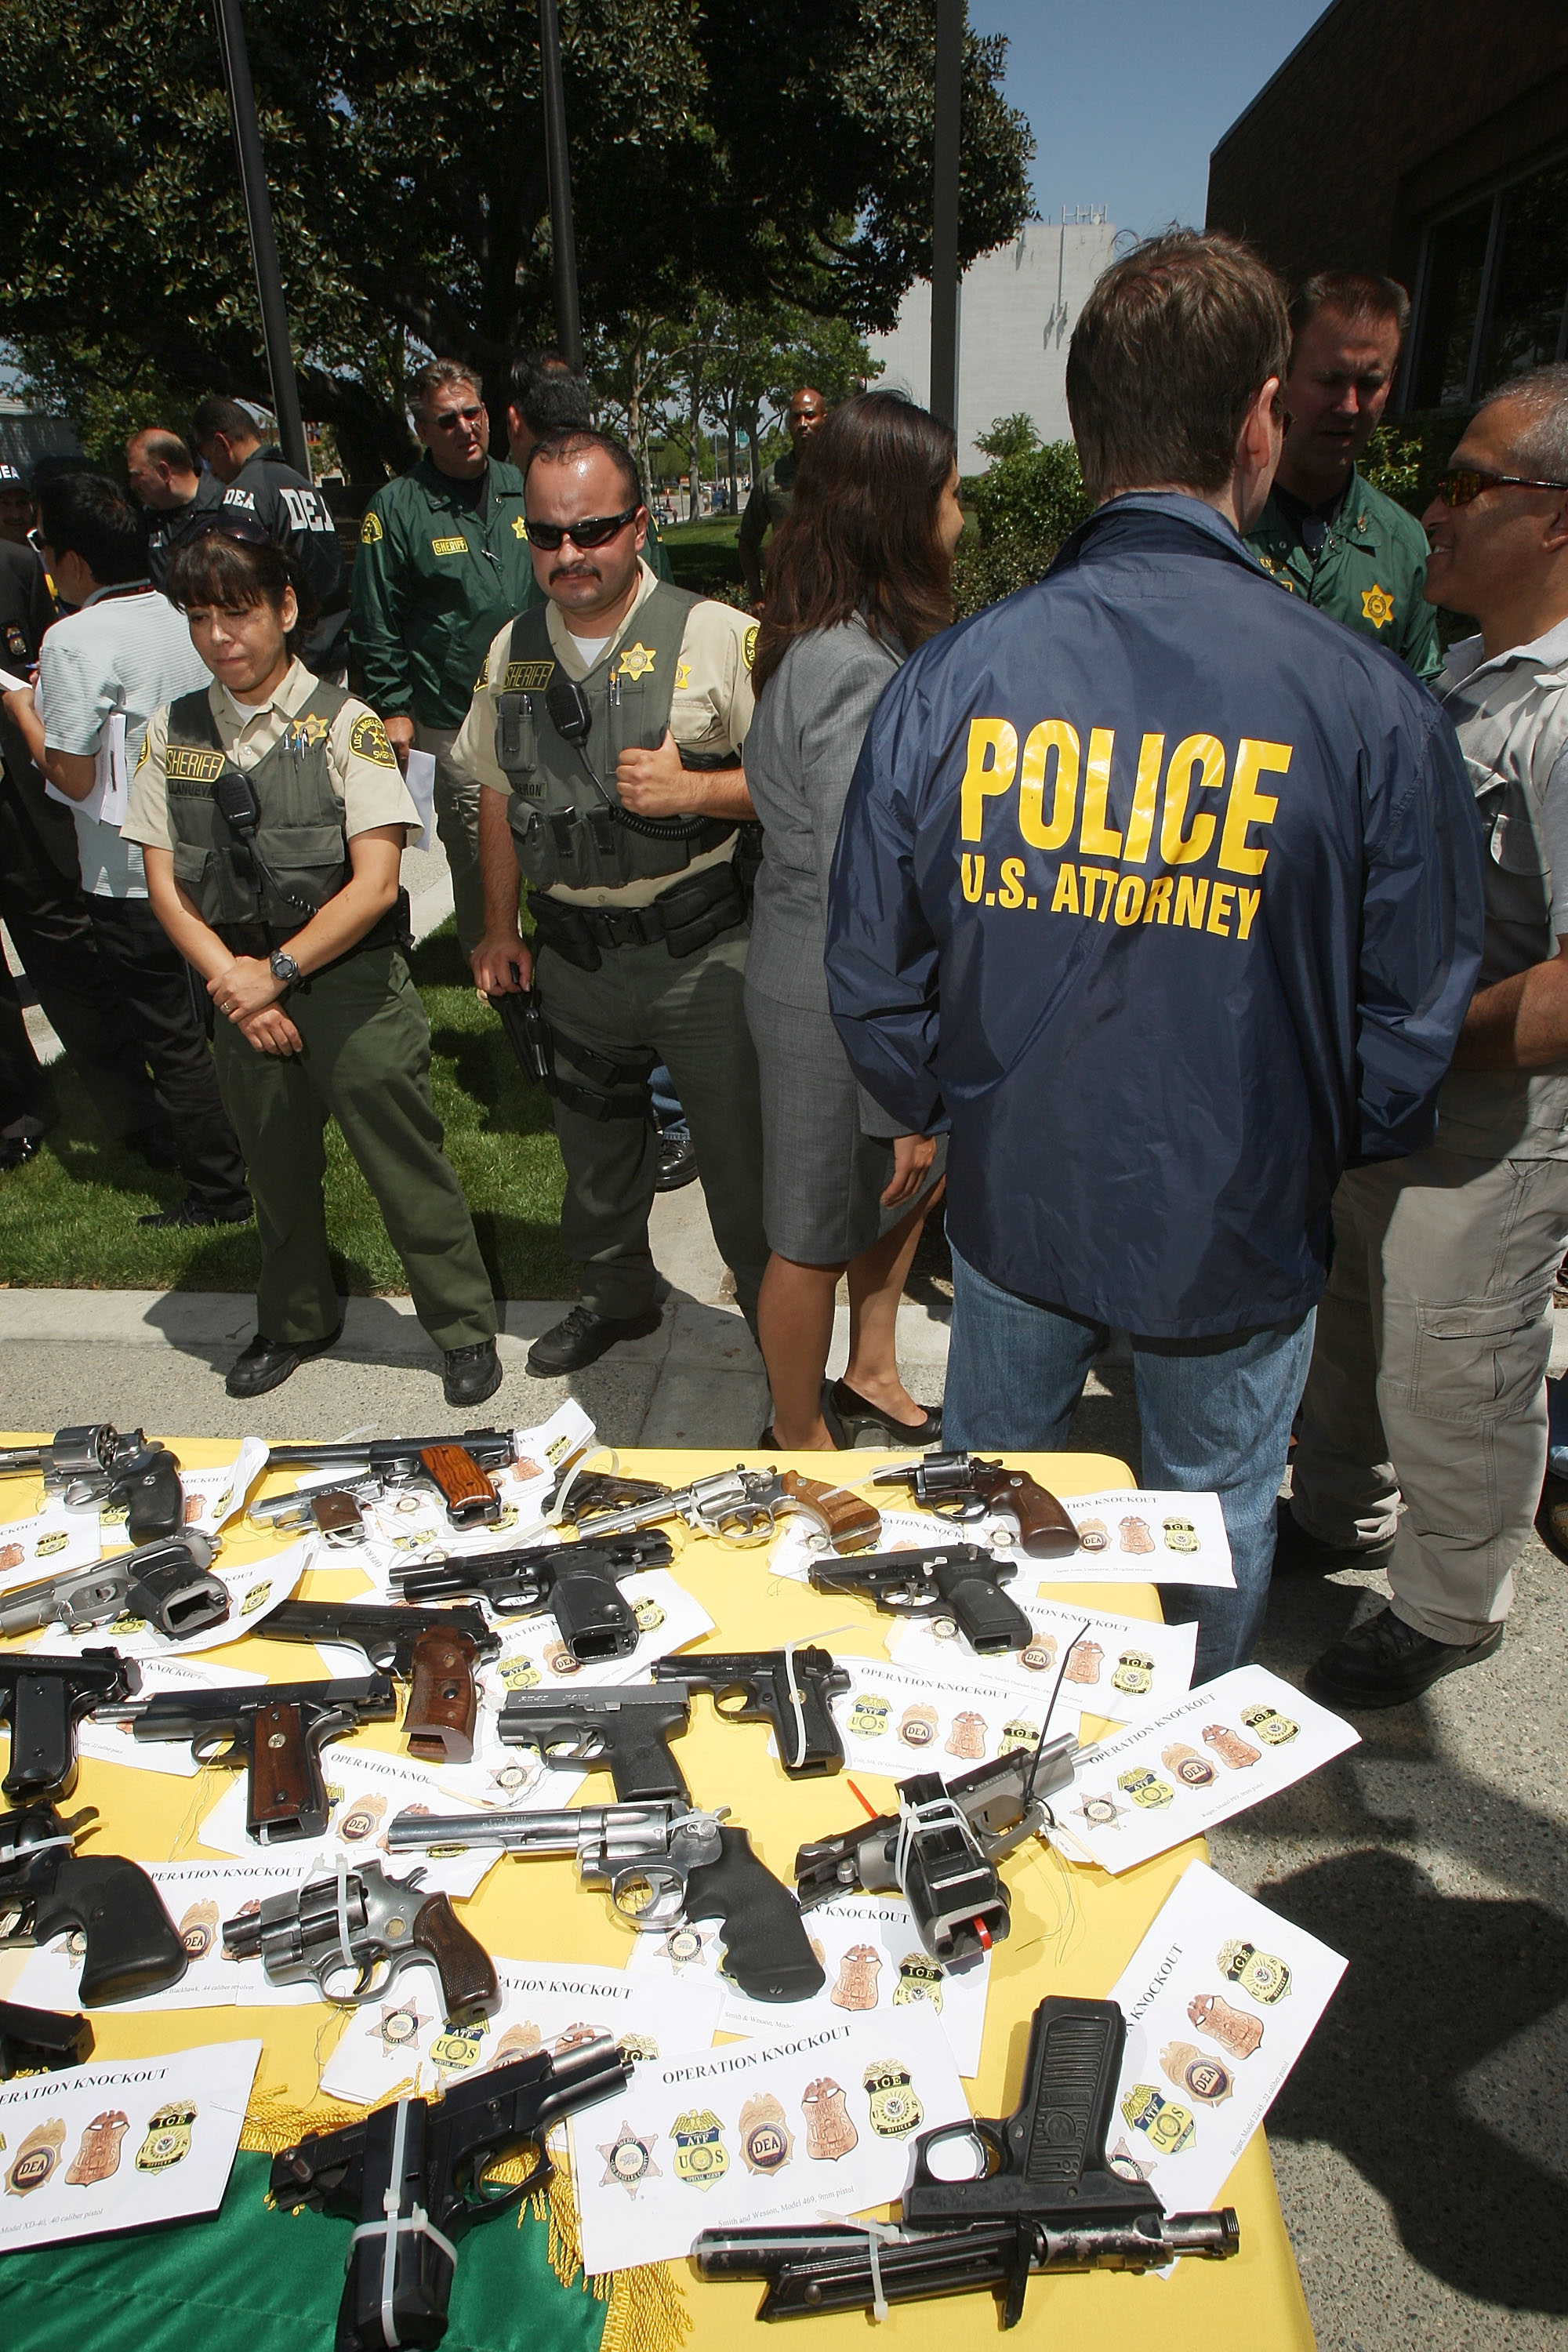 Some of about 125 weapons confiscated during what the federal authorities say is the largest gang takedown in United States history are displayed at a press conference to announce the arrests of scores of alleged gang members and associates on federal racketeering and drug-trafficking charges on May 21, 2009 in the Los Angeles-area community of Lakewood, California. (Photo by David McNew/Getty Images)